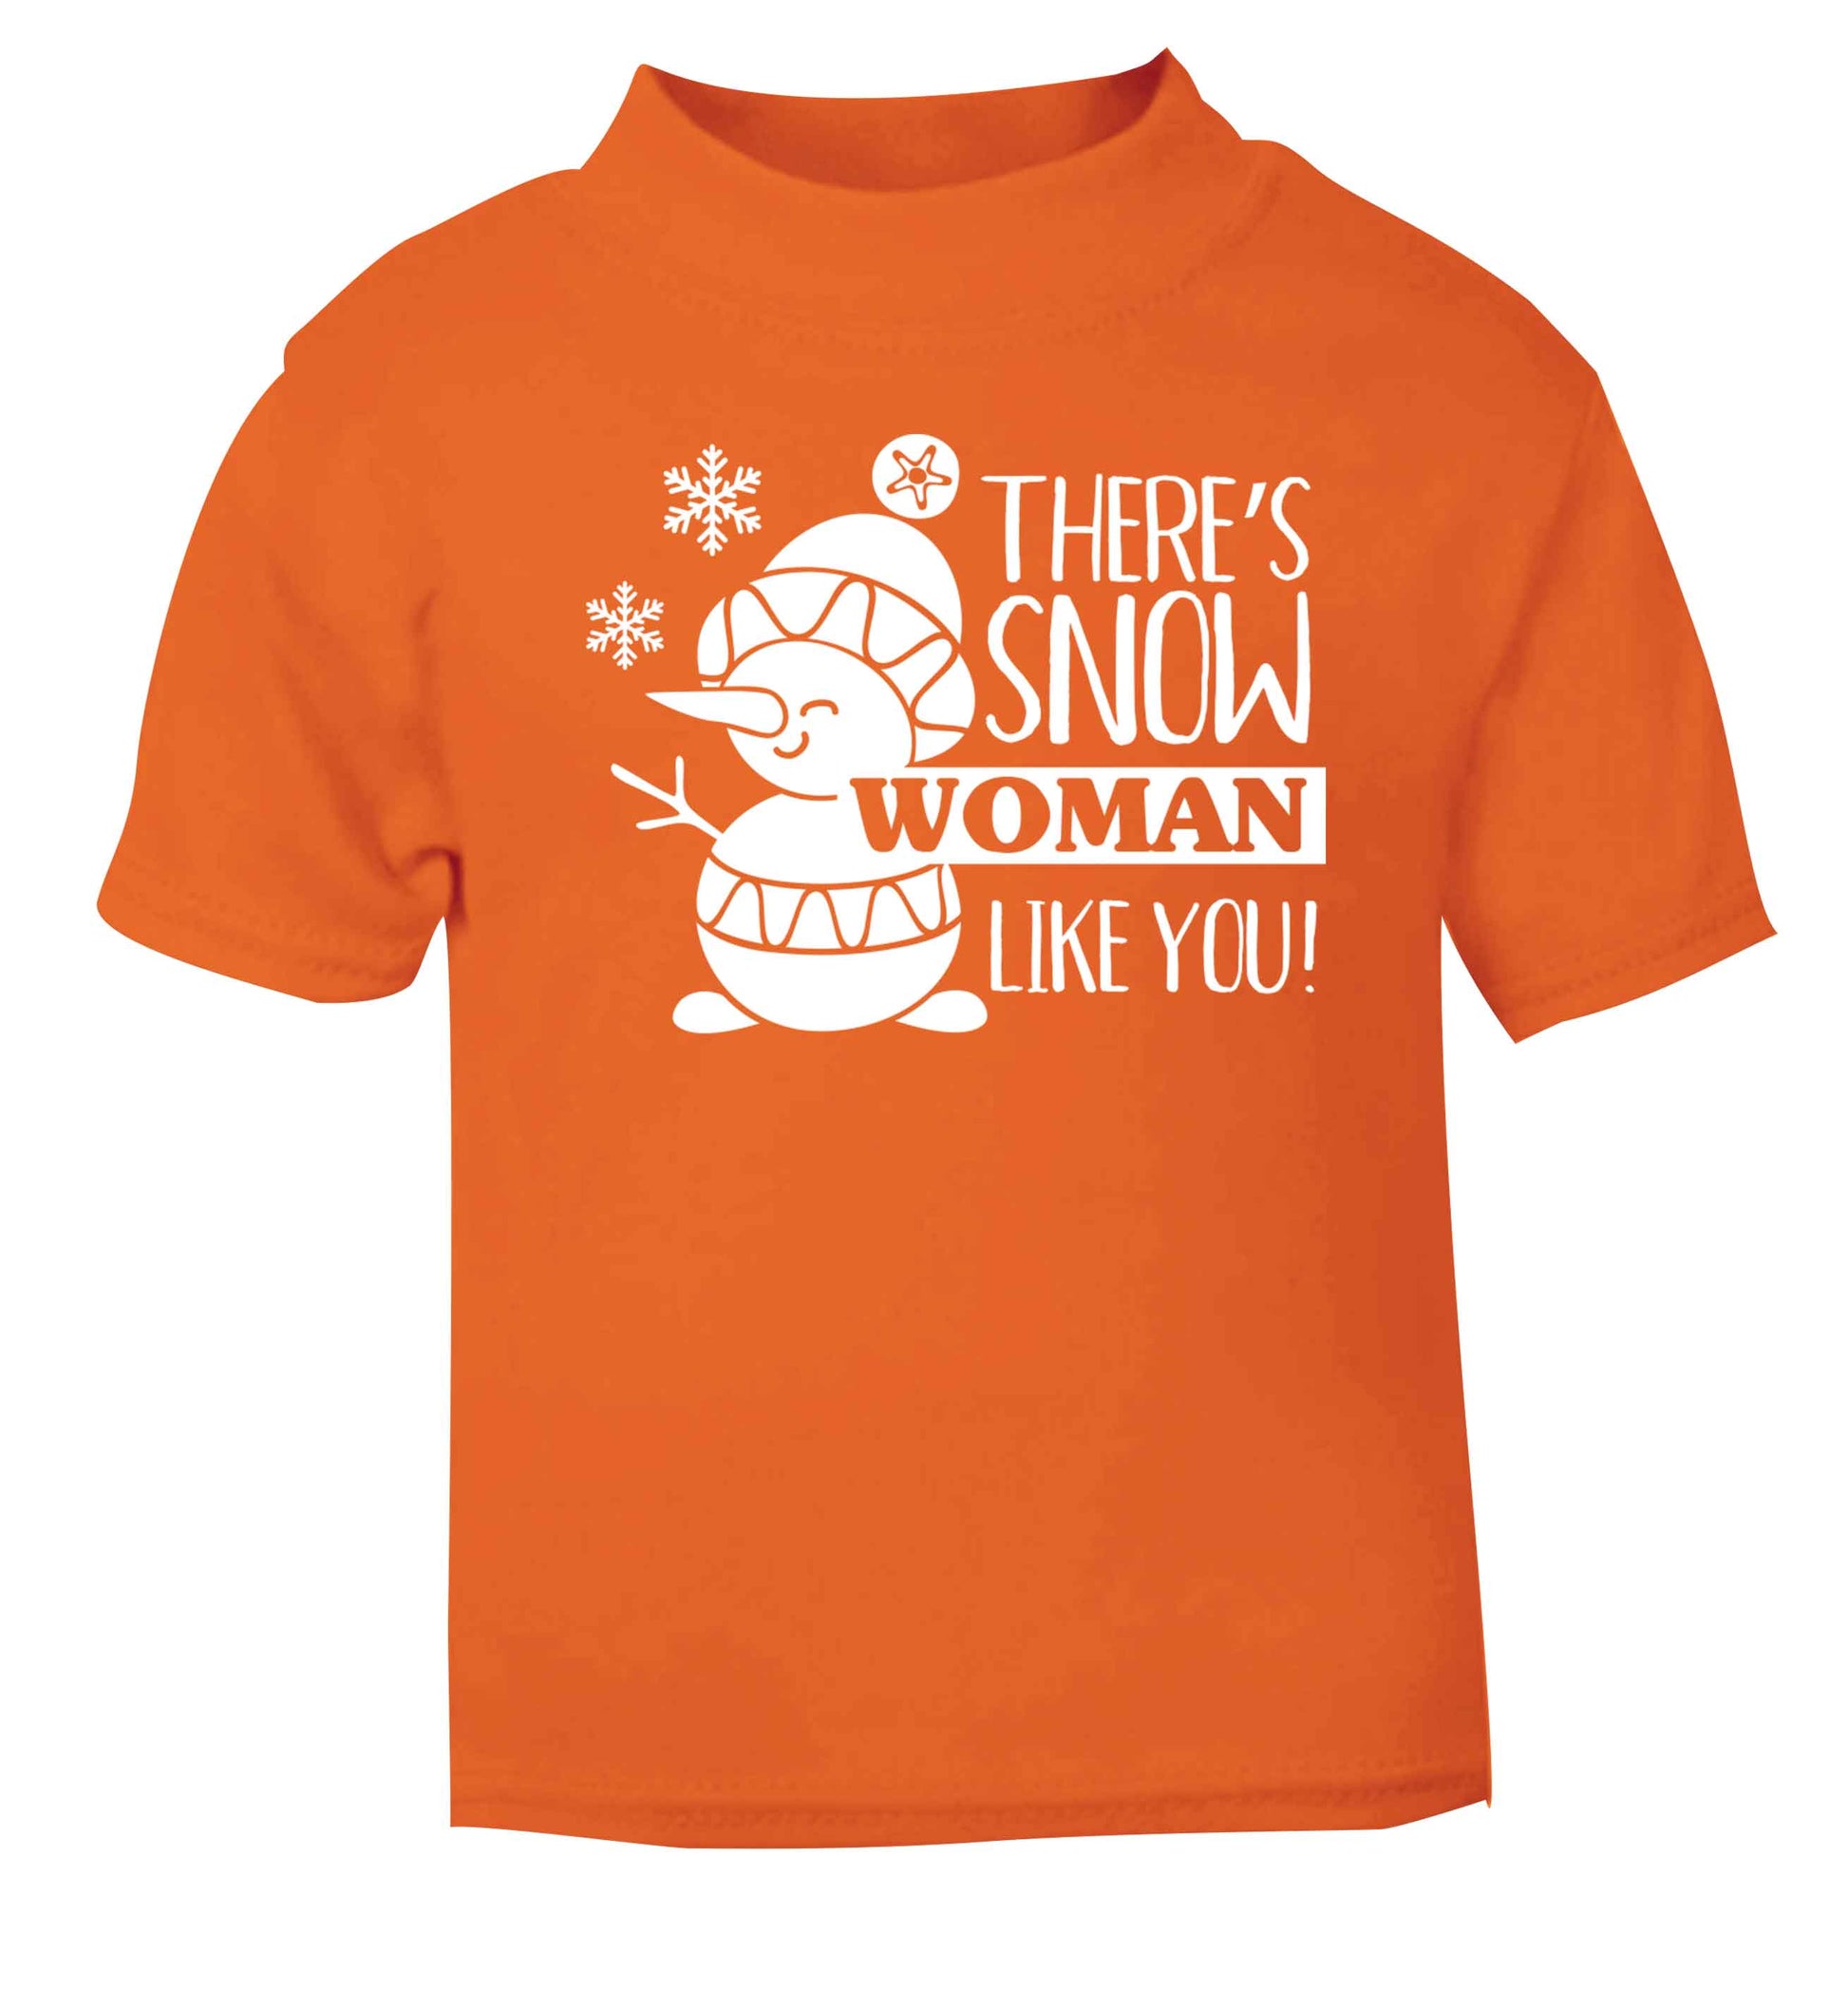 There's snow woman like you orange baby toddler Tshirt 2 Years